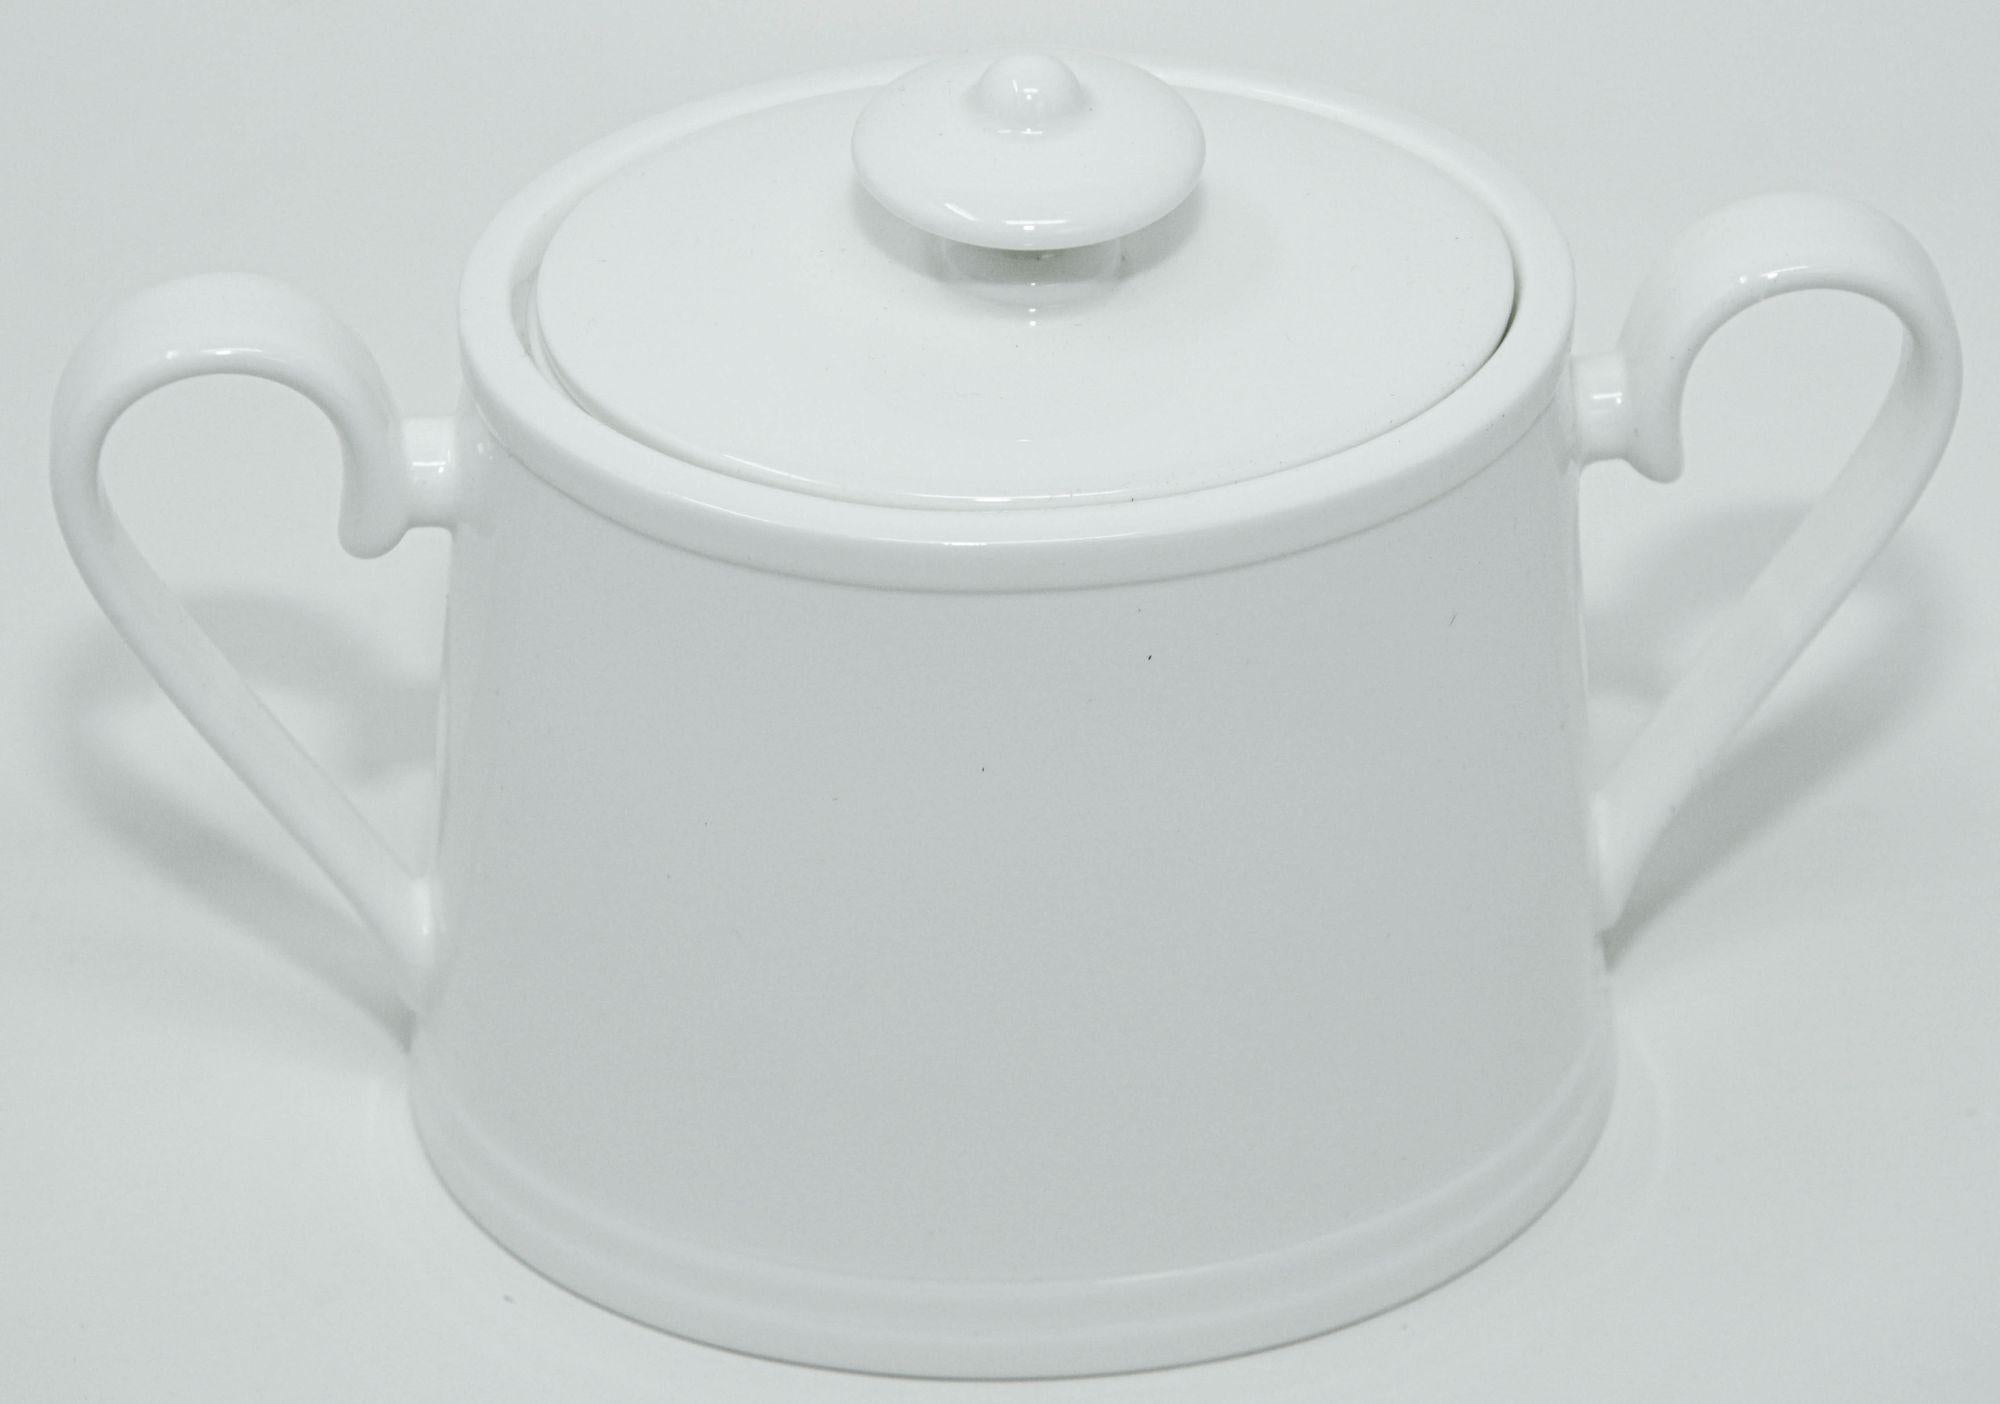 Villeroy & Boch Stella Hotel white Bone China Sugar Bowl with Cover For Sale 6